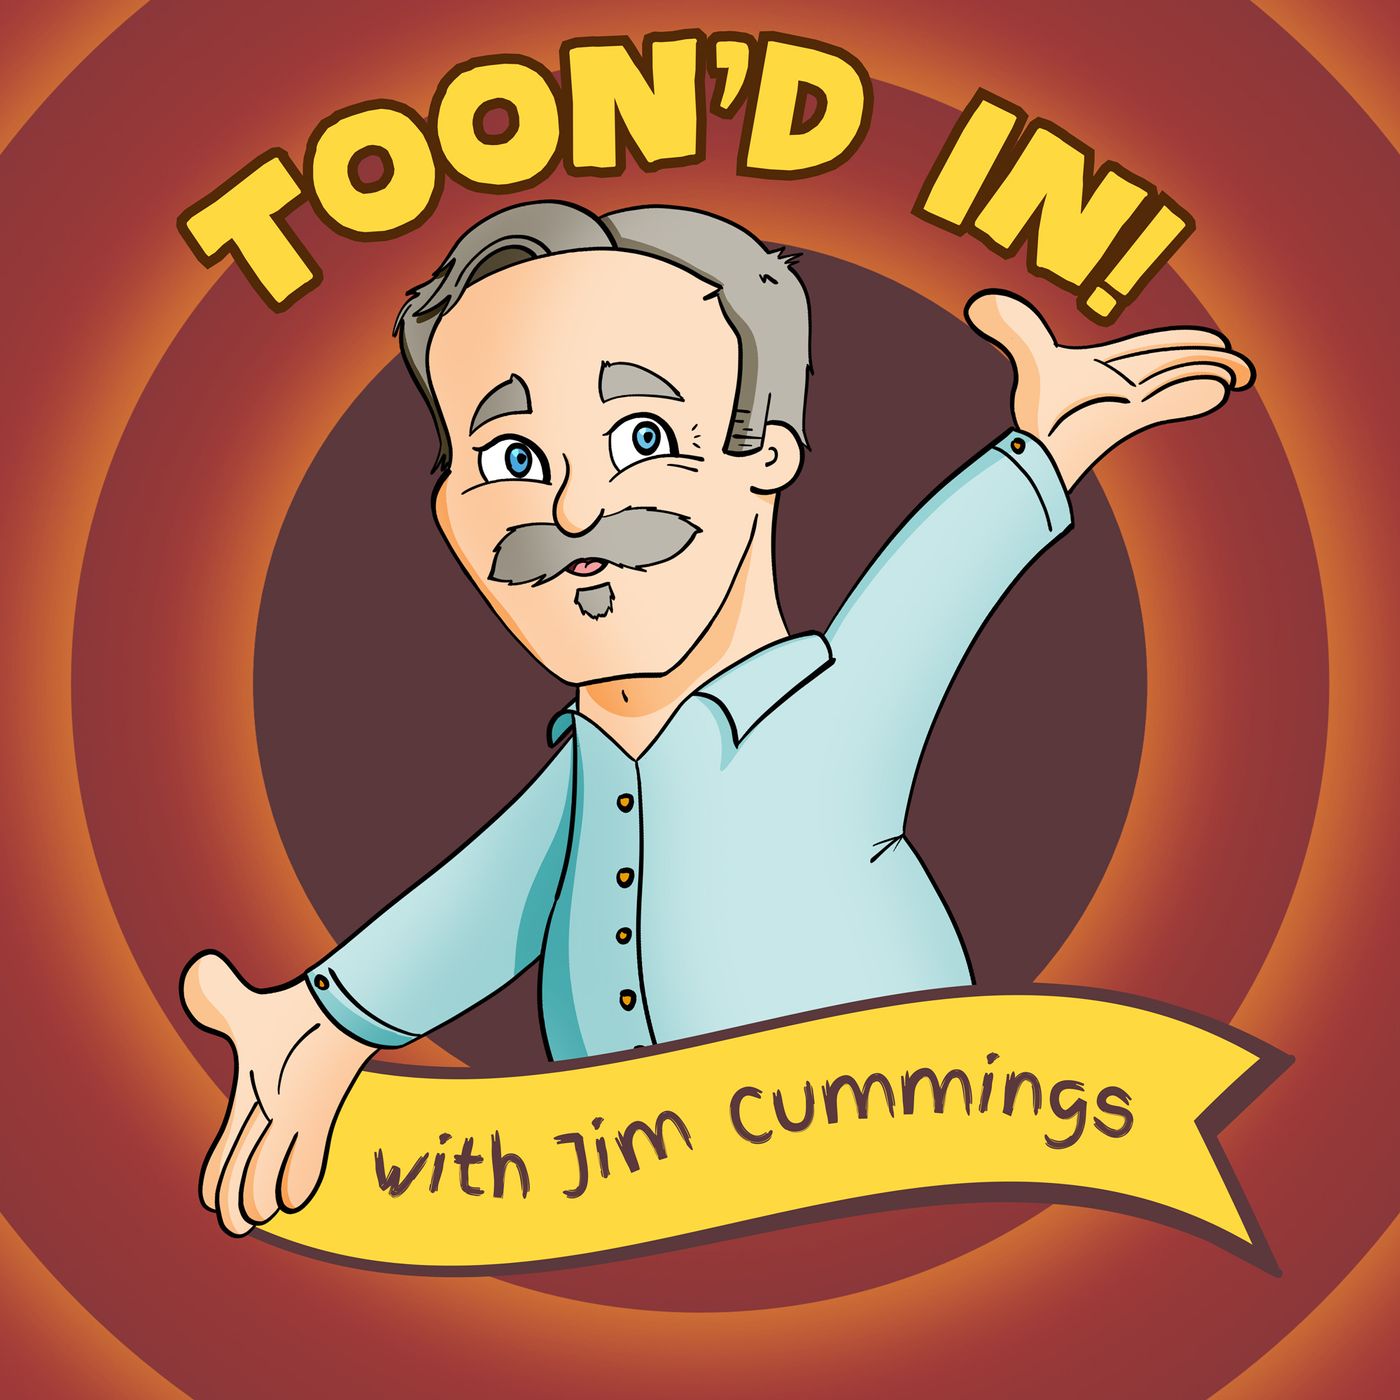 NEW PODCAST! Toon’d In! with Jim Cummings has arrived!